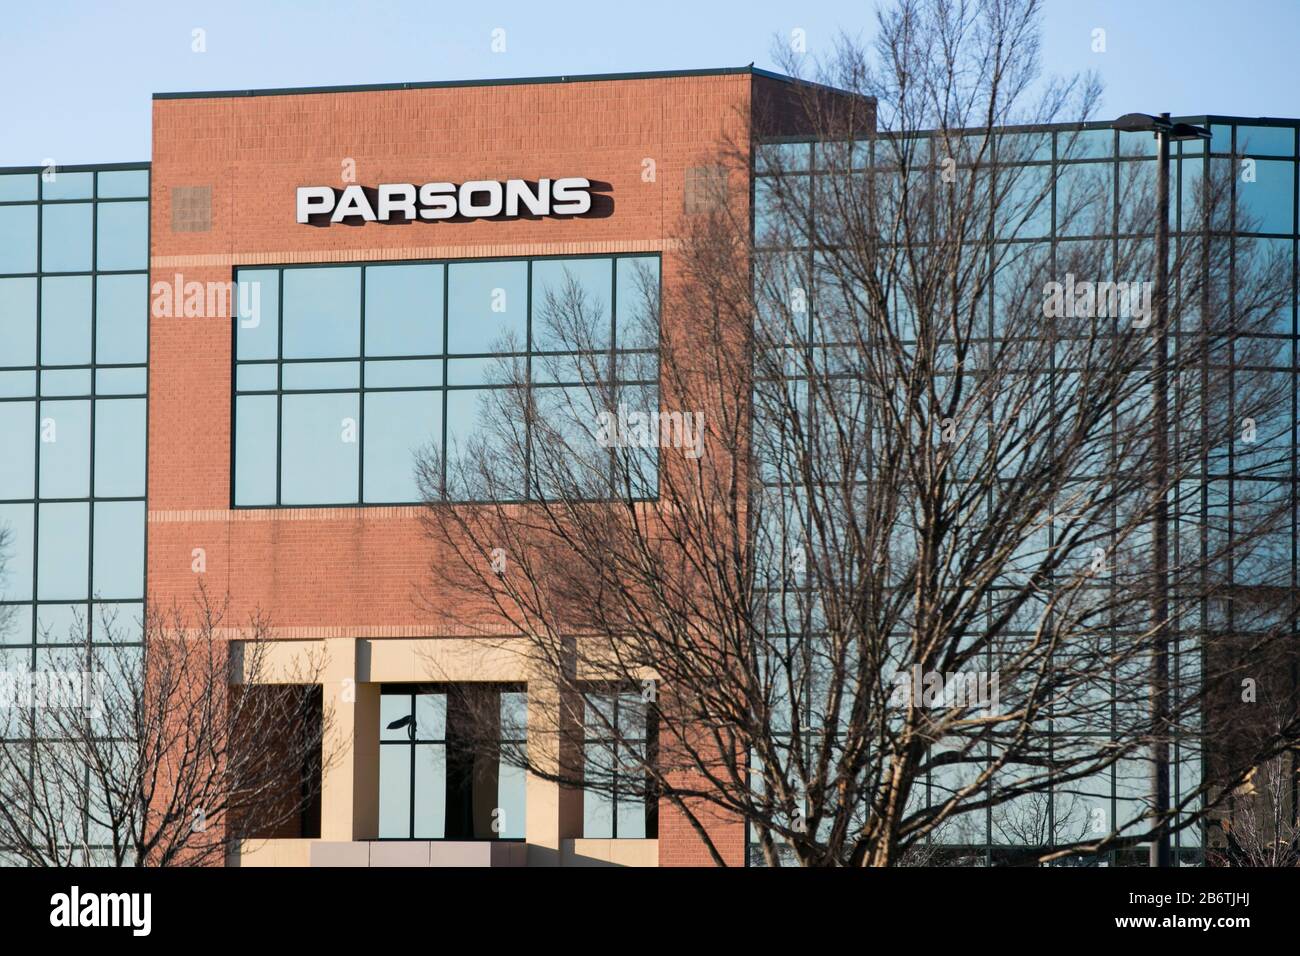 A logo sign outside of a facility occupied by Parsons Corporation in Columbia, Maryland on March 8, 2020. Stock Photo